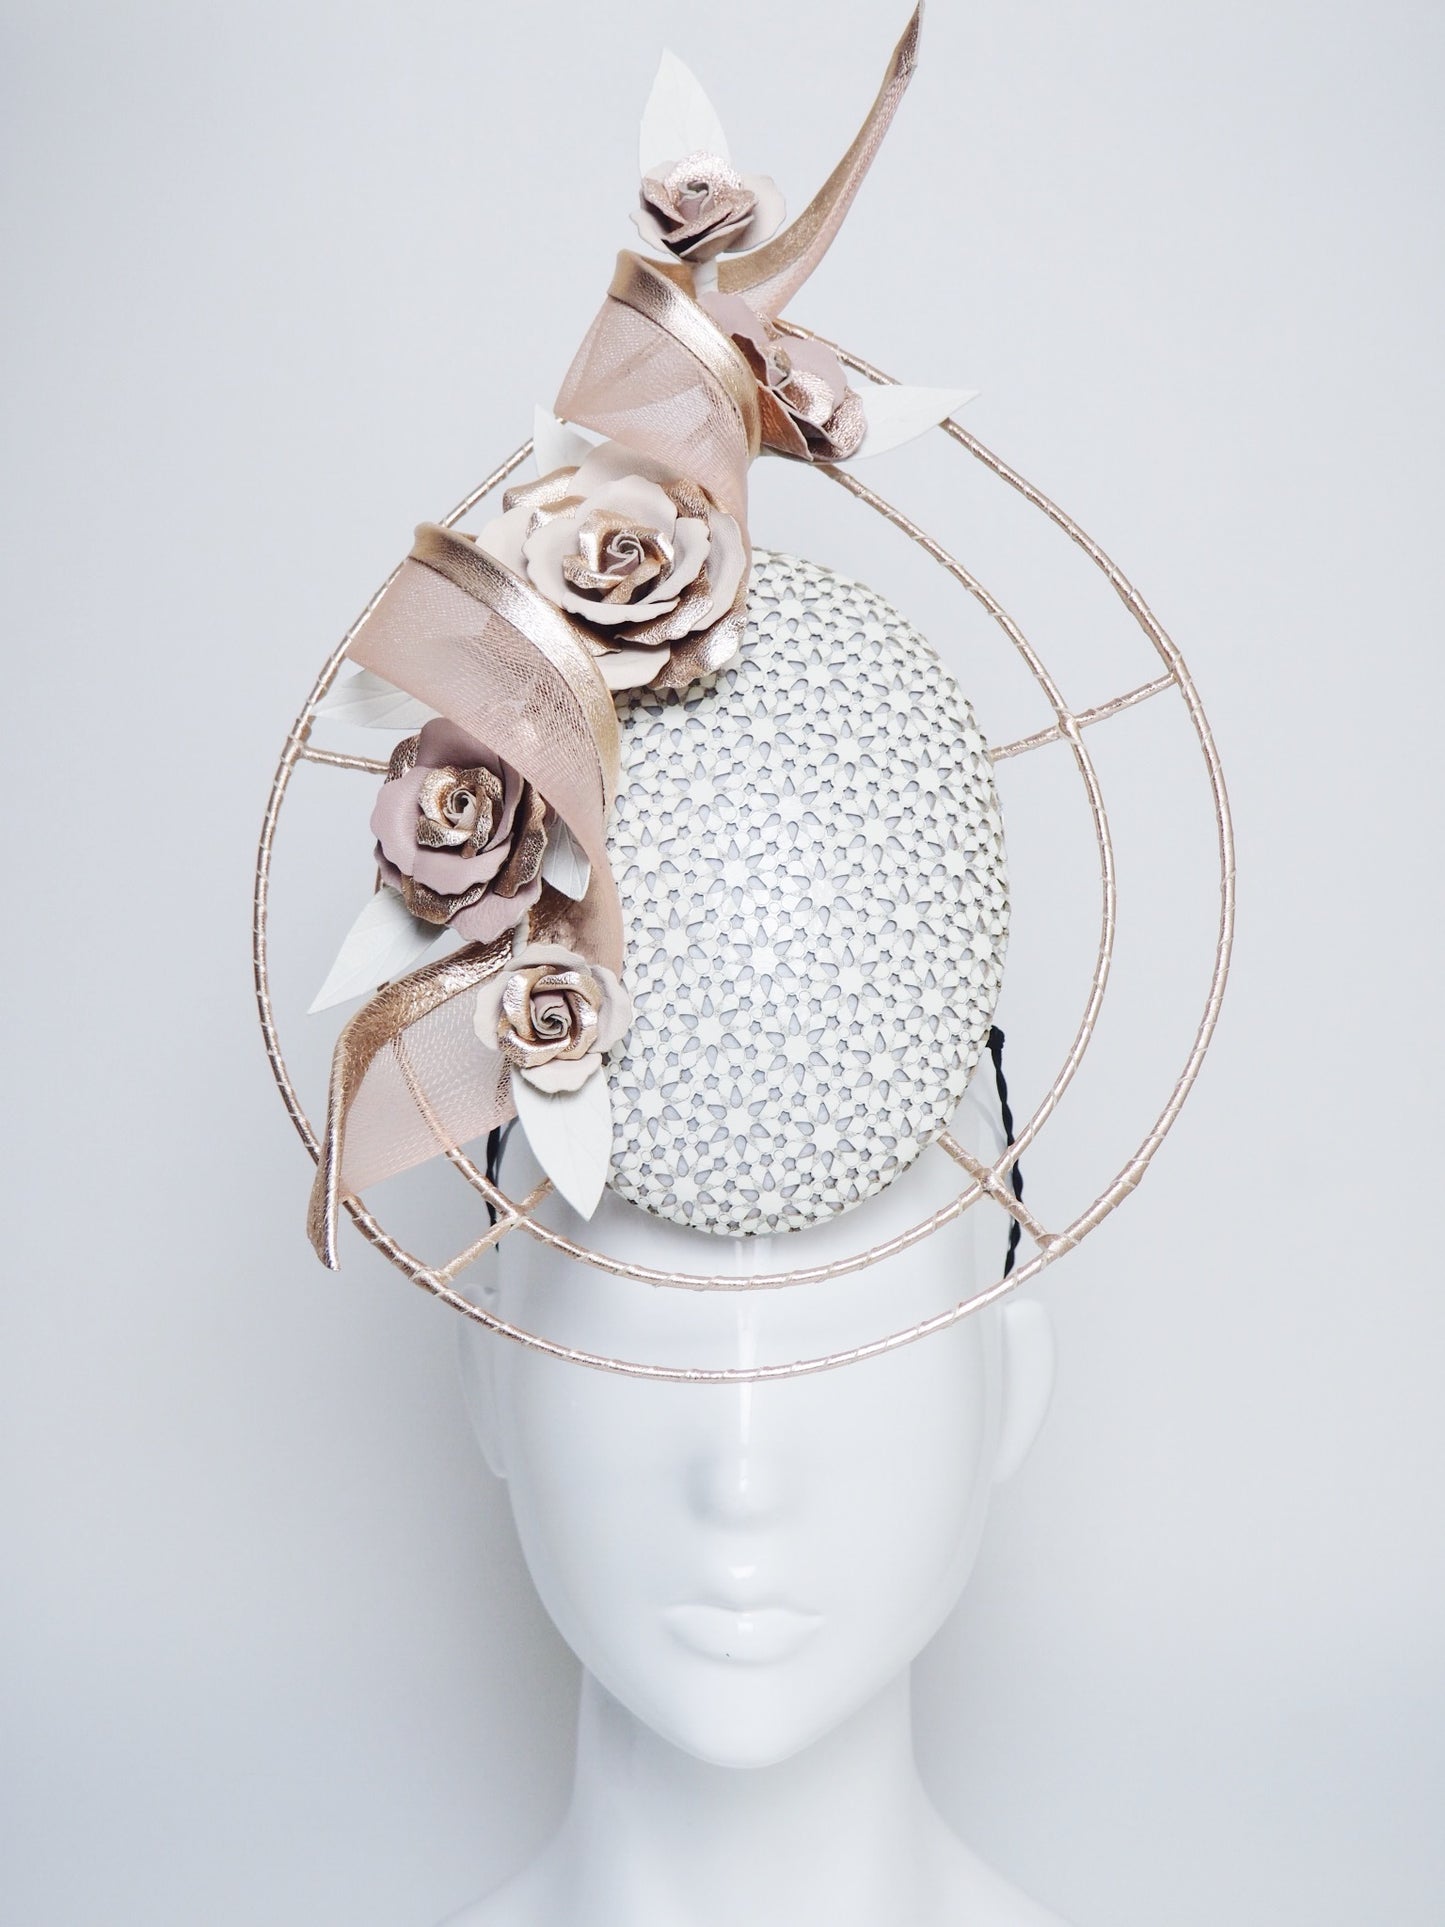 Gently Does It - Off white, nude and rose gold percher with a crinoline swirl and Rose detial